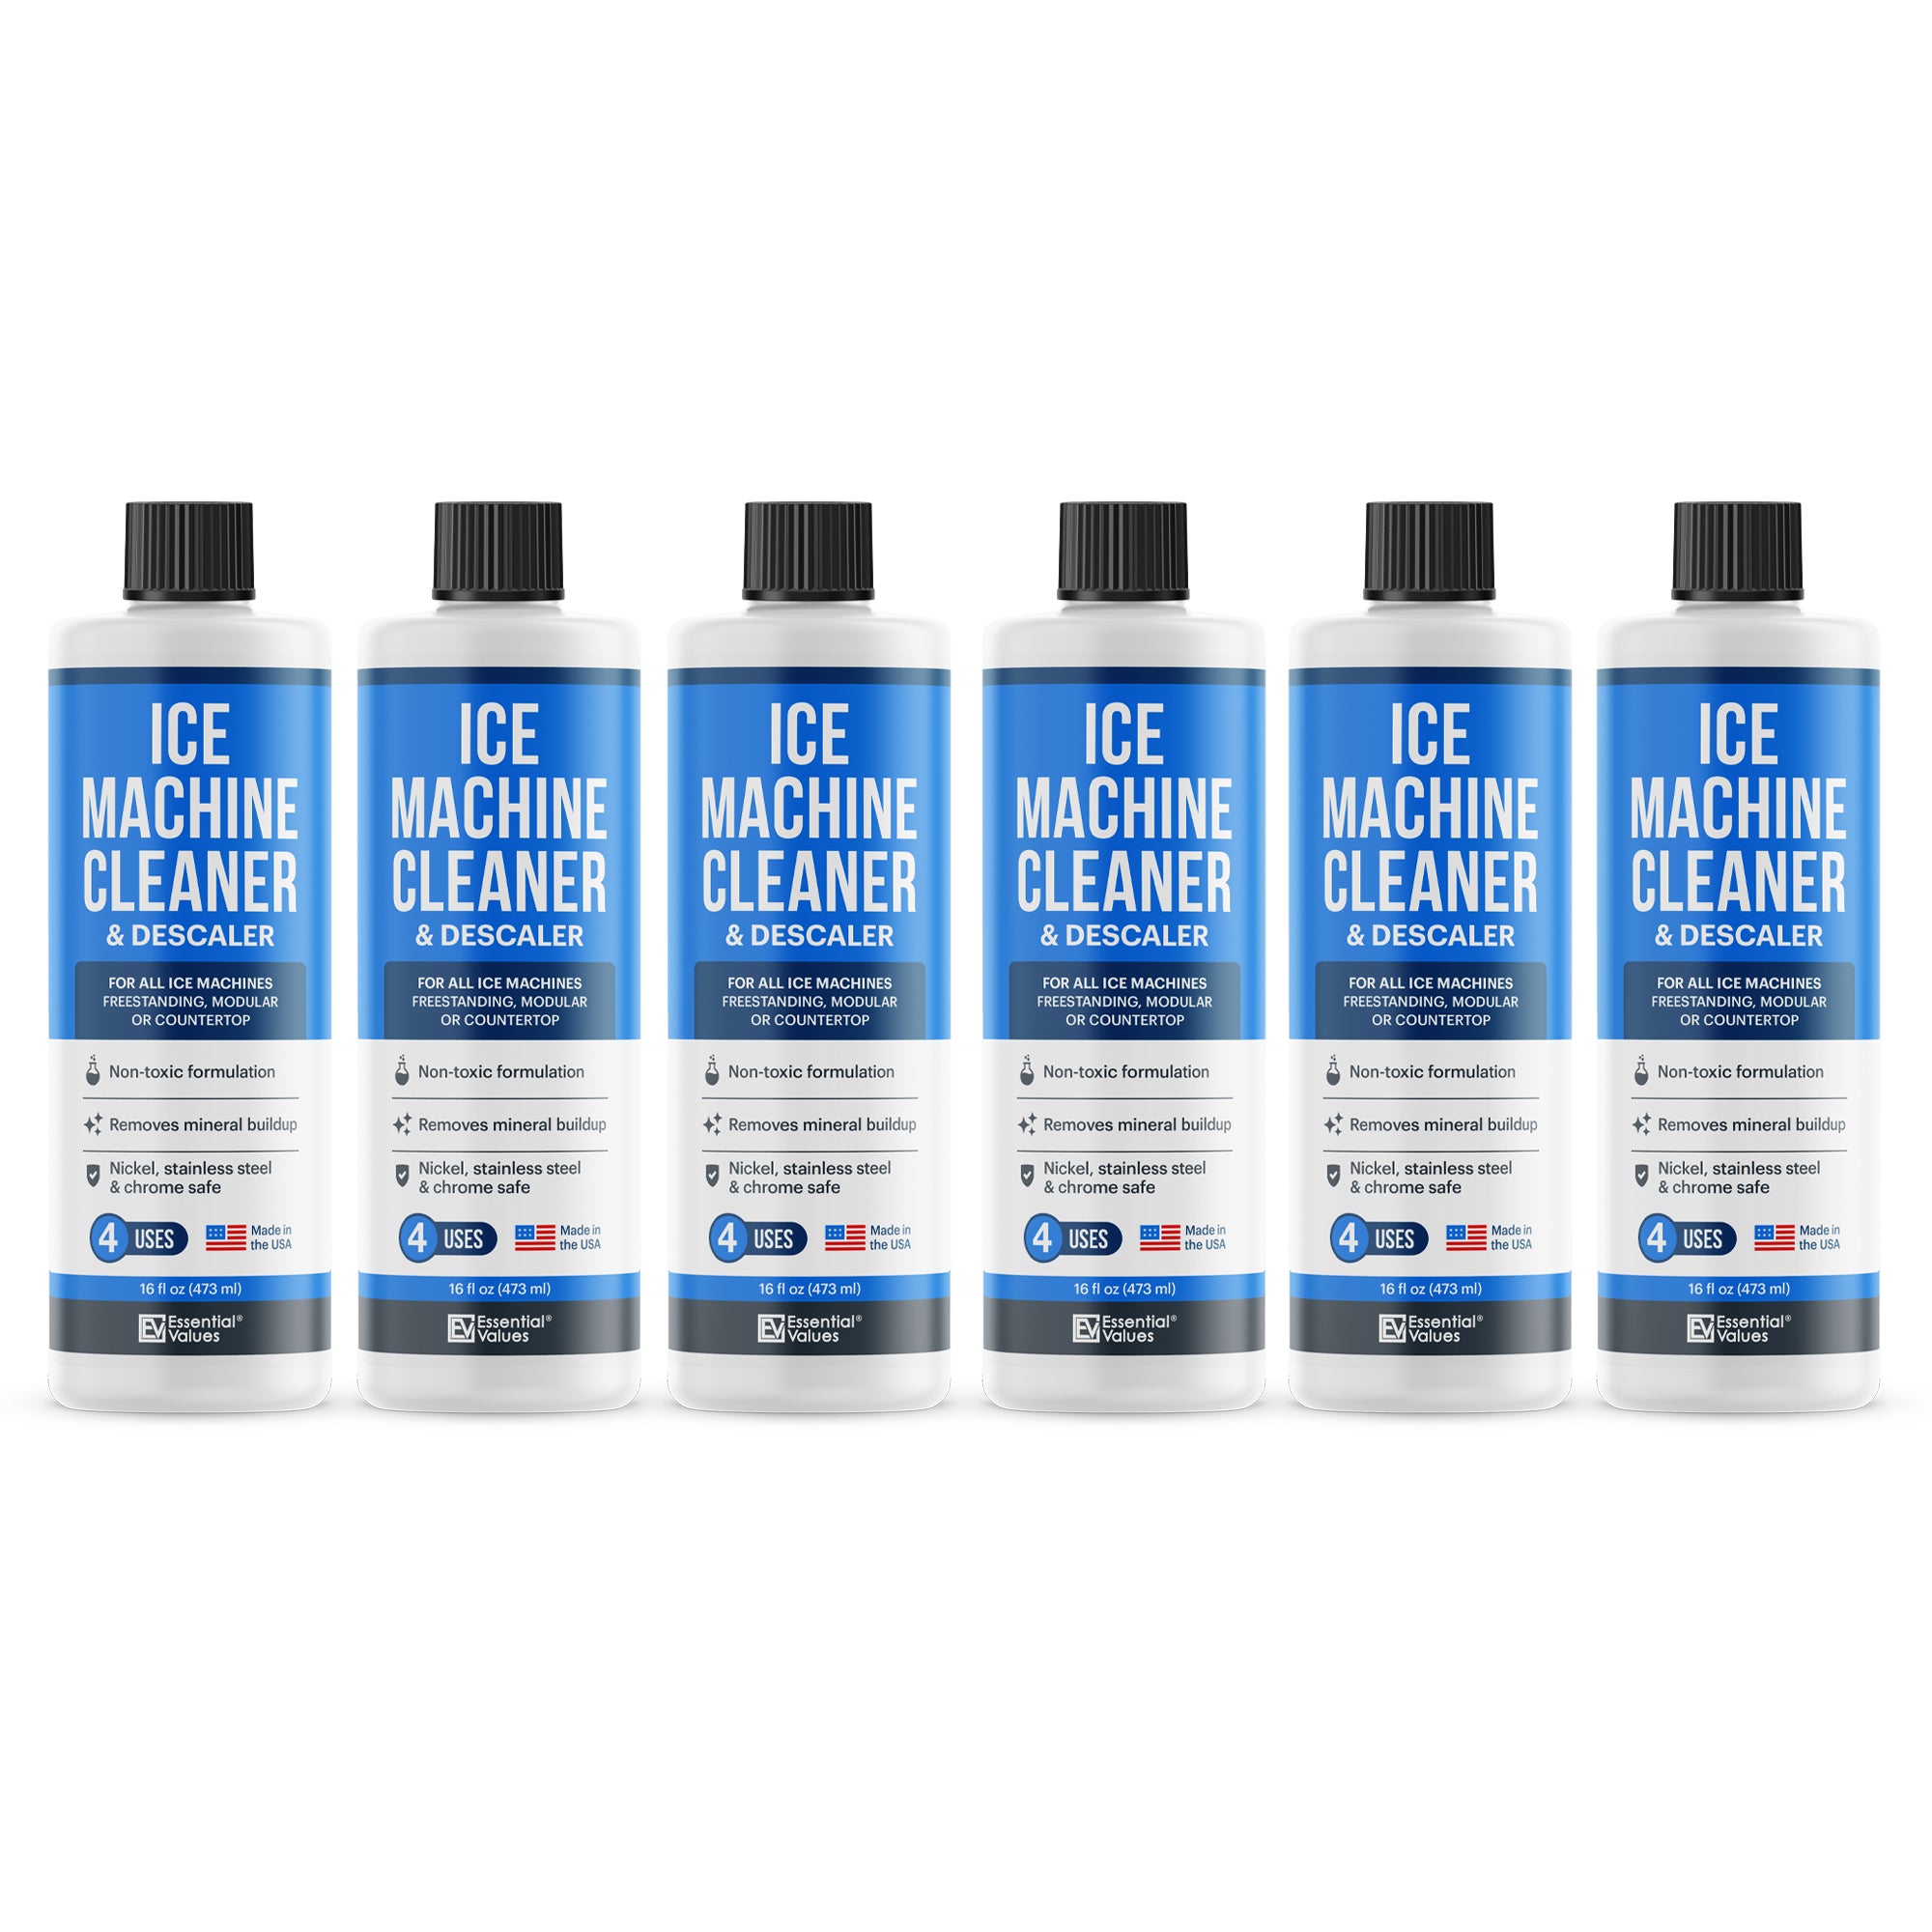 Essential Values Ice Machine Cleaner, Nickel Safe Descaler  Ice Maker  Cleaner, Universal Application For Affresh/Whirlpool 4396808, Manitowac,  Ice-O-Matic, Scotsman, Follett Ice Makers By, 16OZ: Buy Online at Best  Price in UAE 